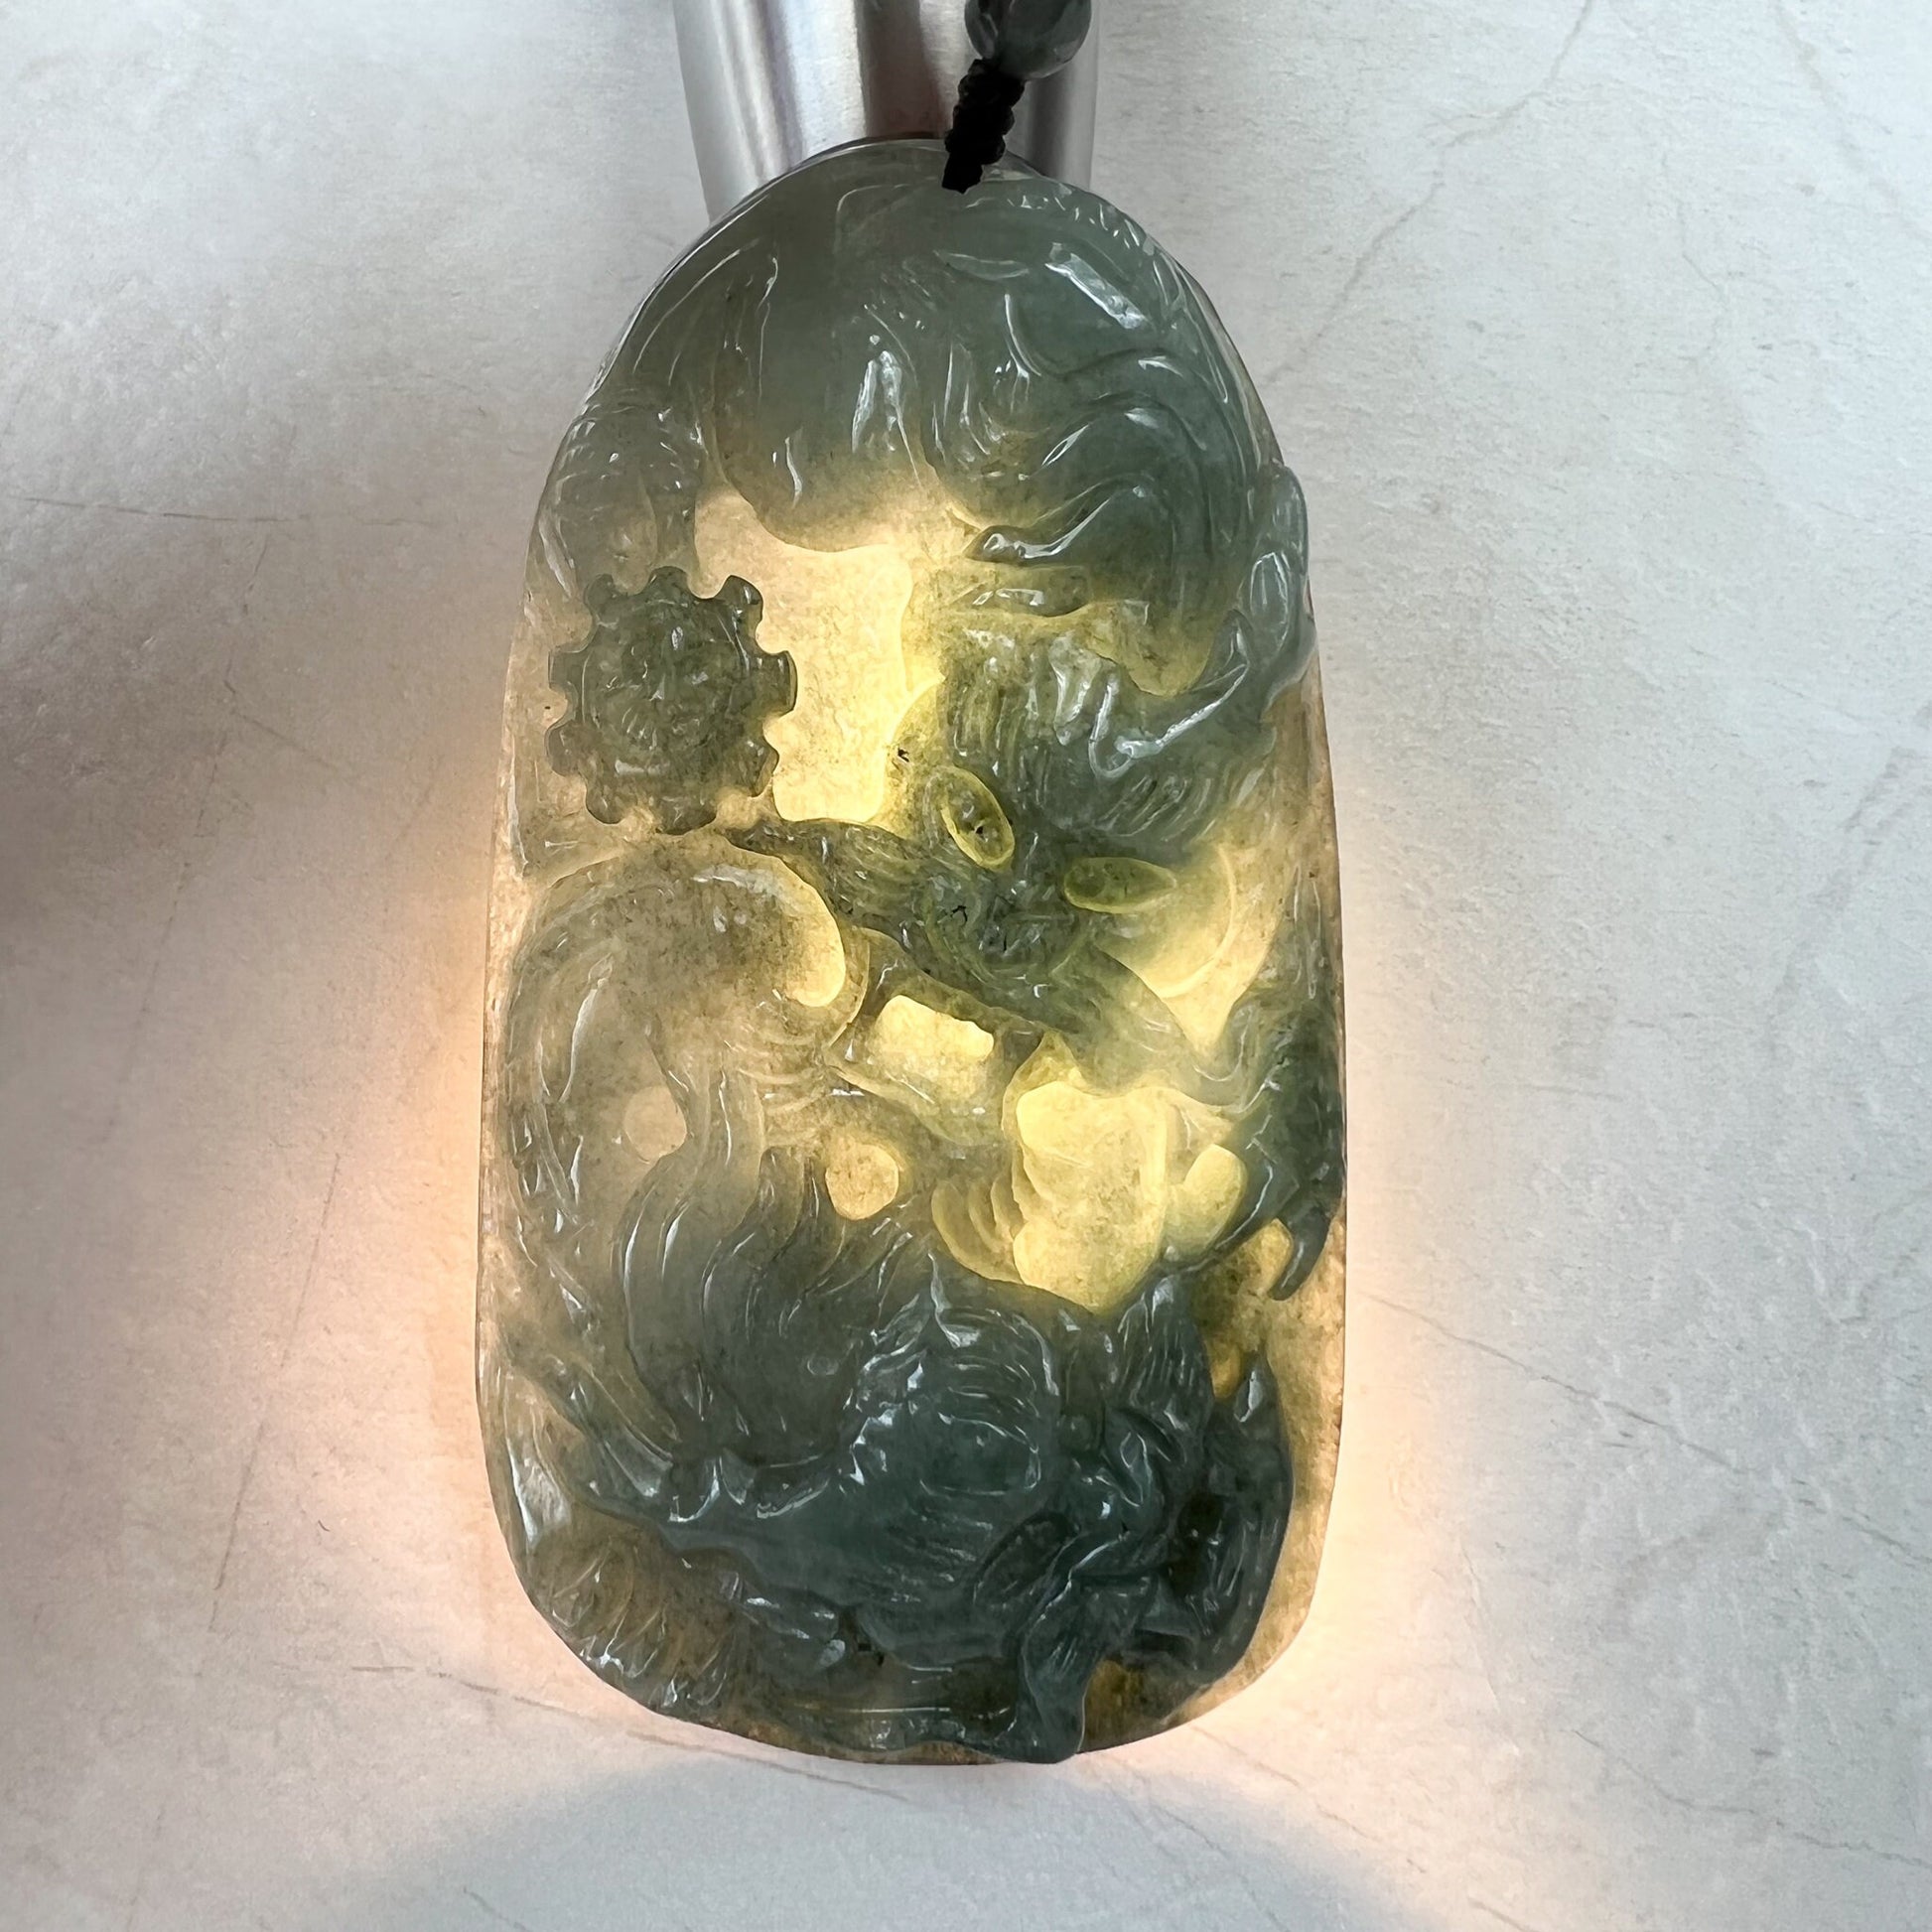 Twin Jade Dragon, Green Jadeite Jade, Chinese Zodiac Hand Carved Pendant Necklace, YJ-1221-0213916 - AriaDesignCollection